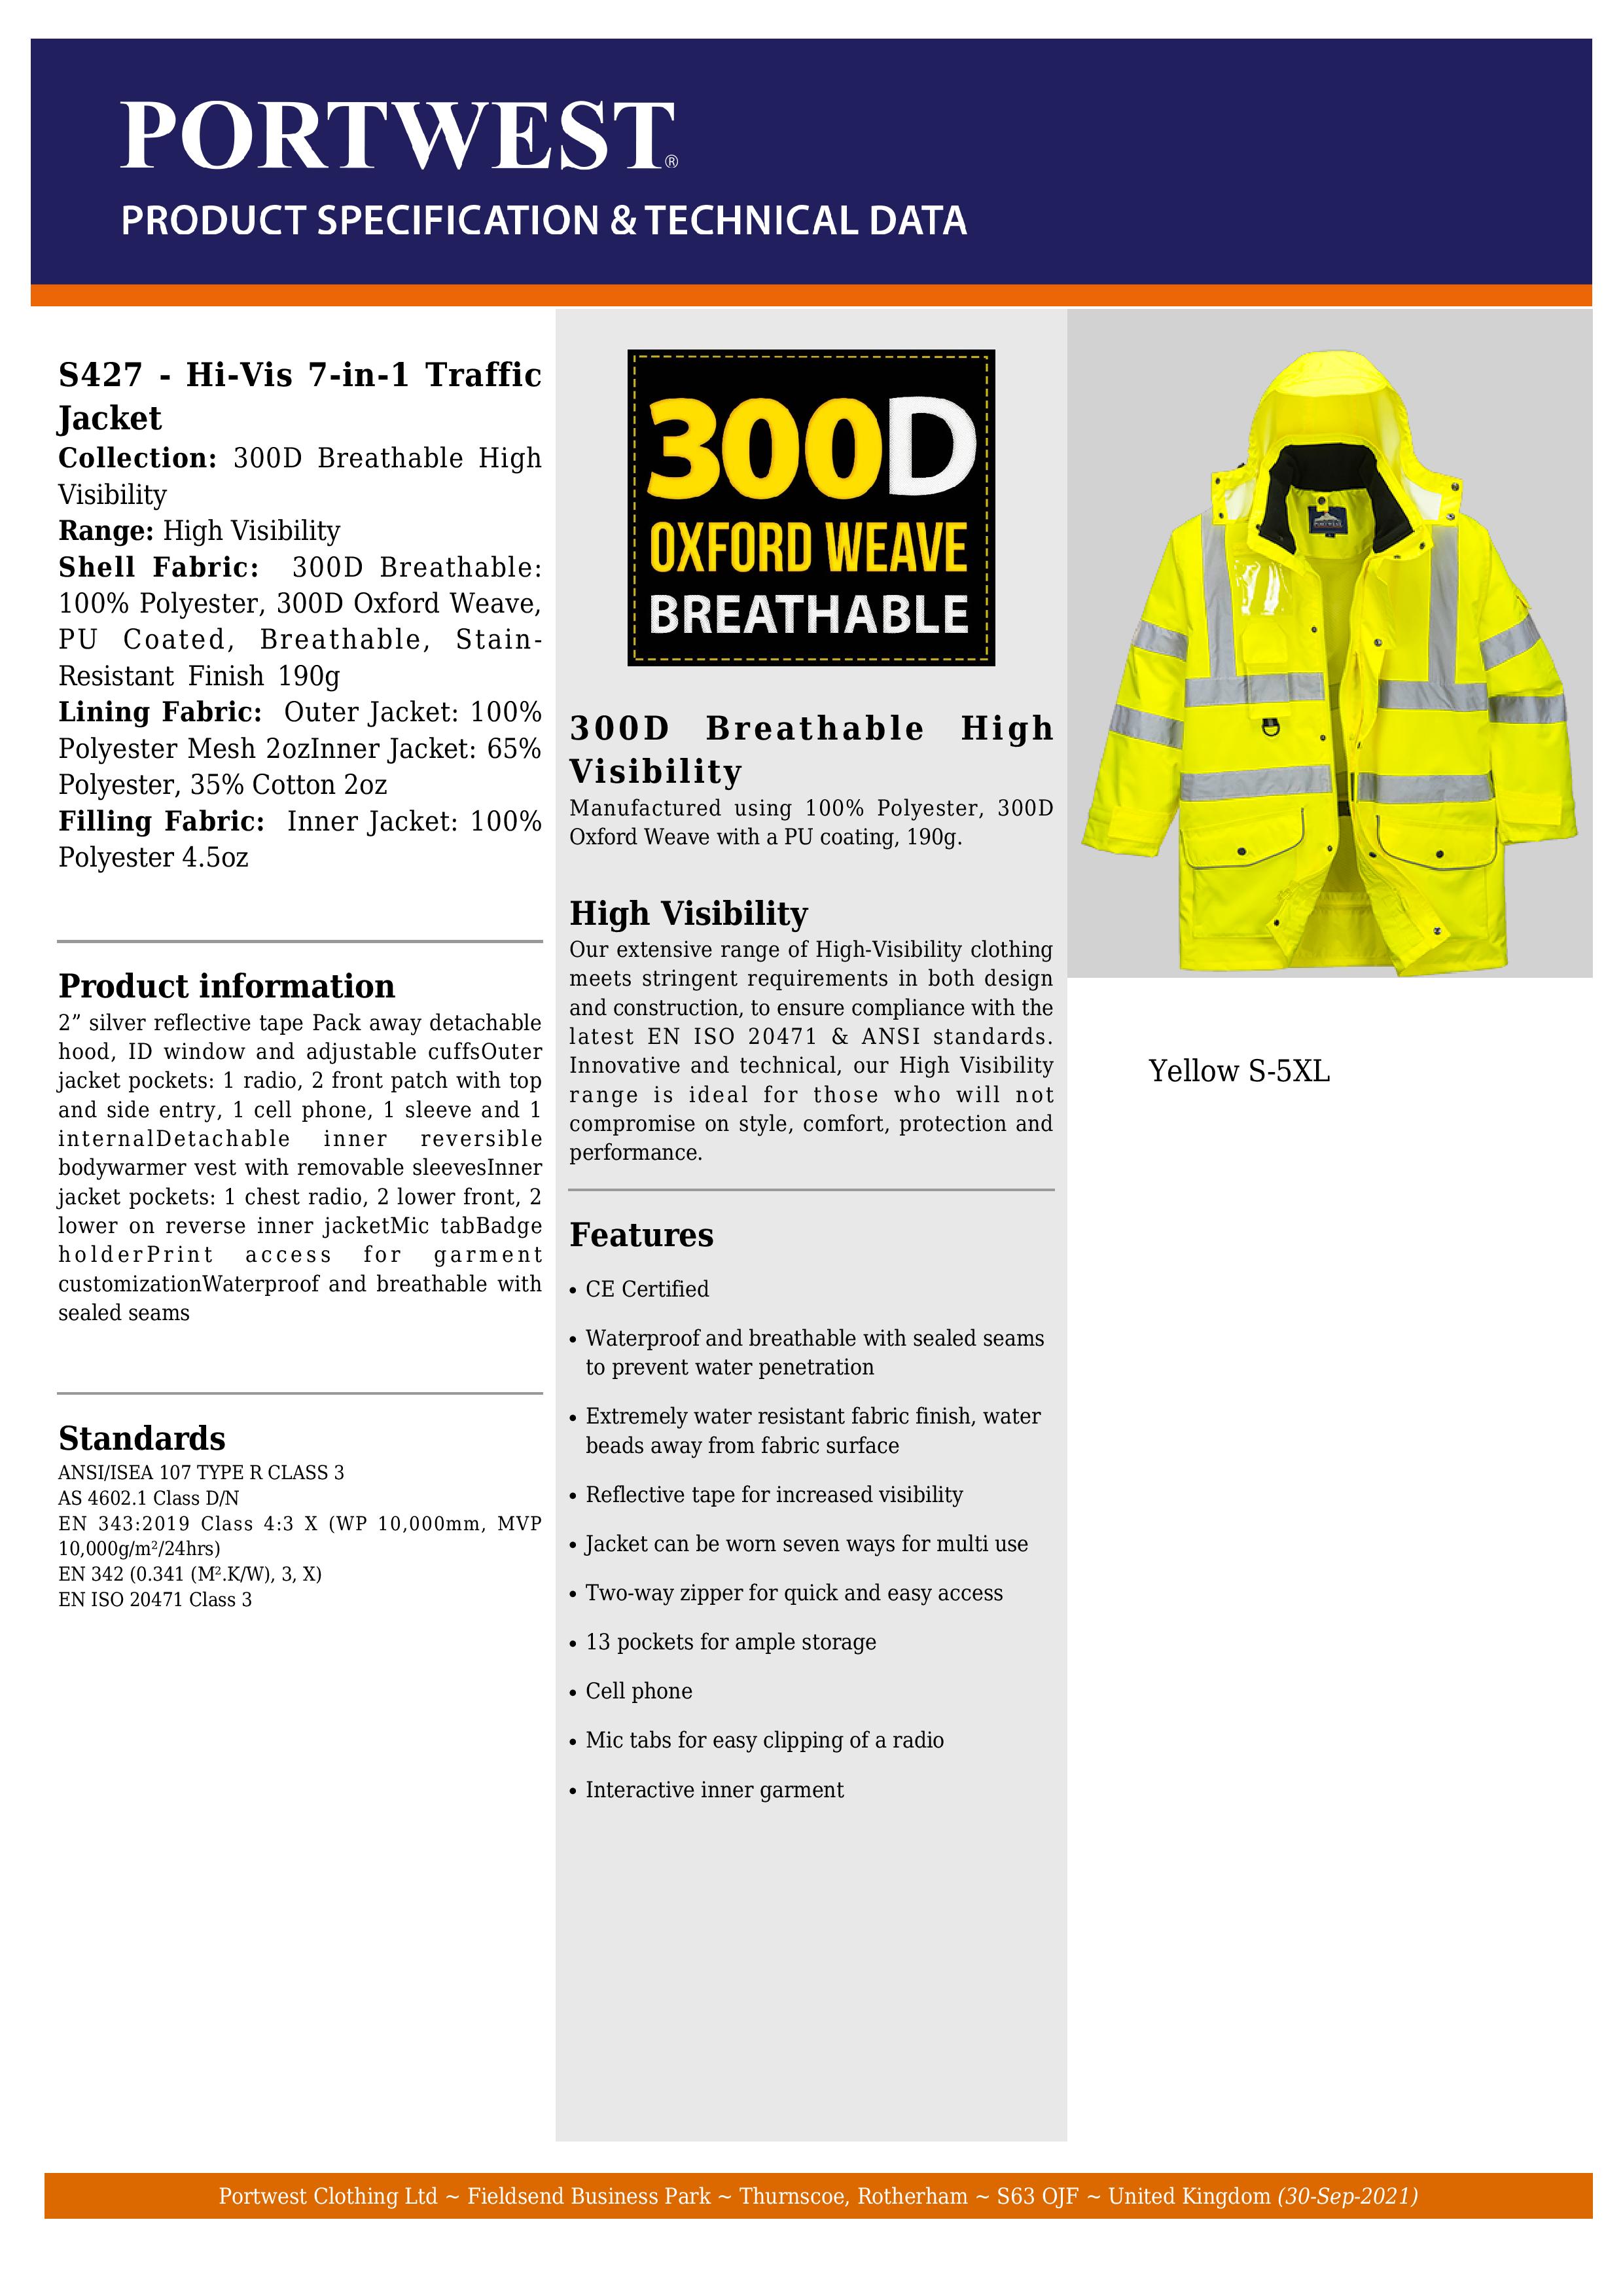 PORTWEST HIGH-VIS 300D TRAFFIC JACKET 7-IN-1 JACKET SIZES S-5XL CLASS 3 US427 